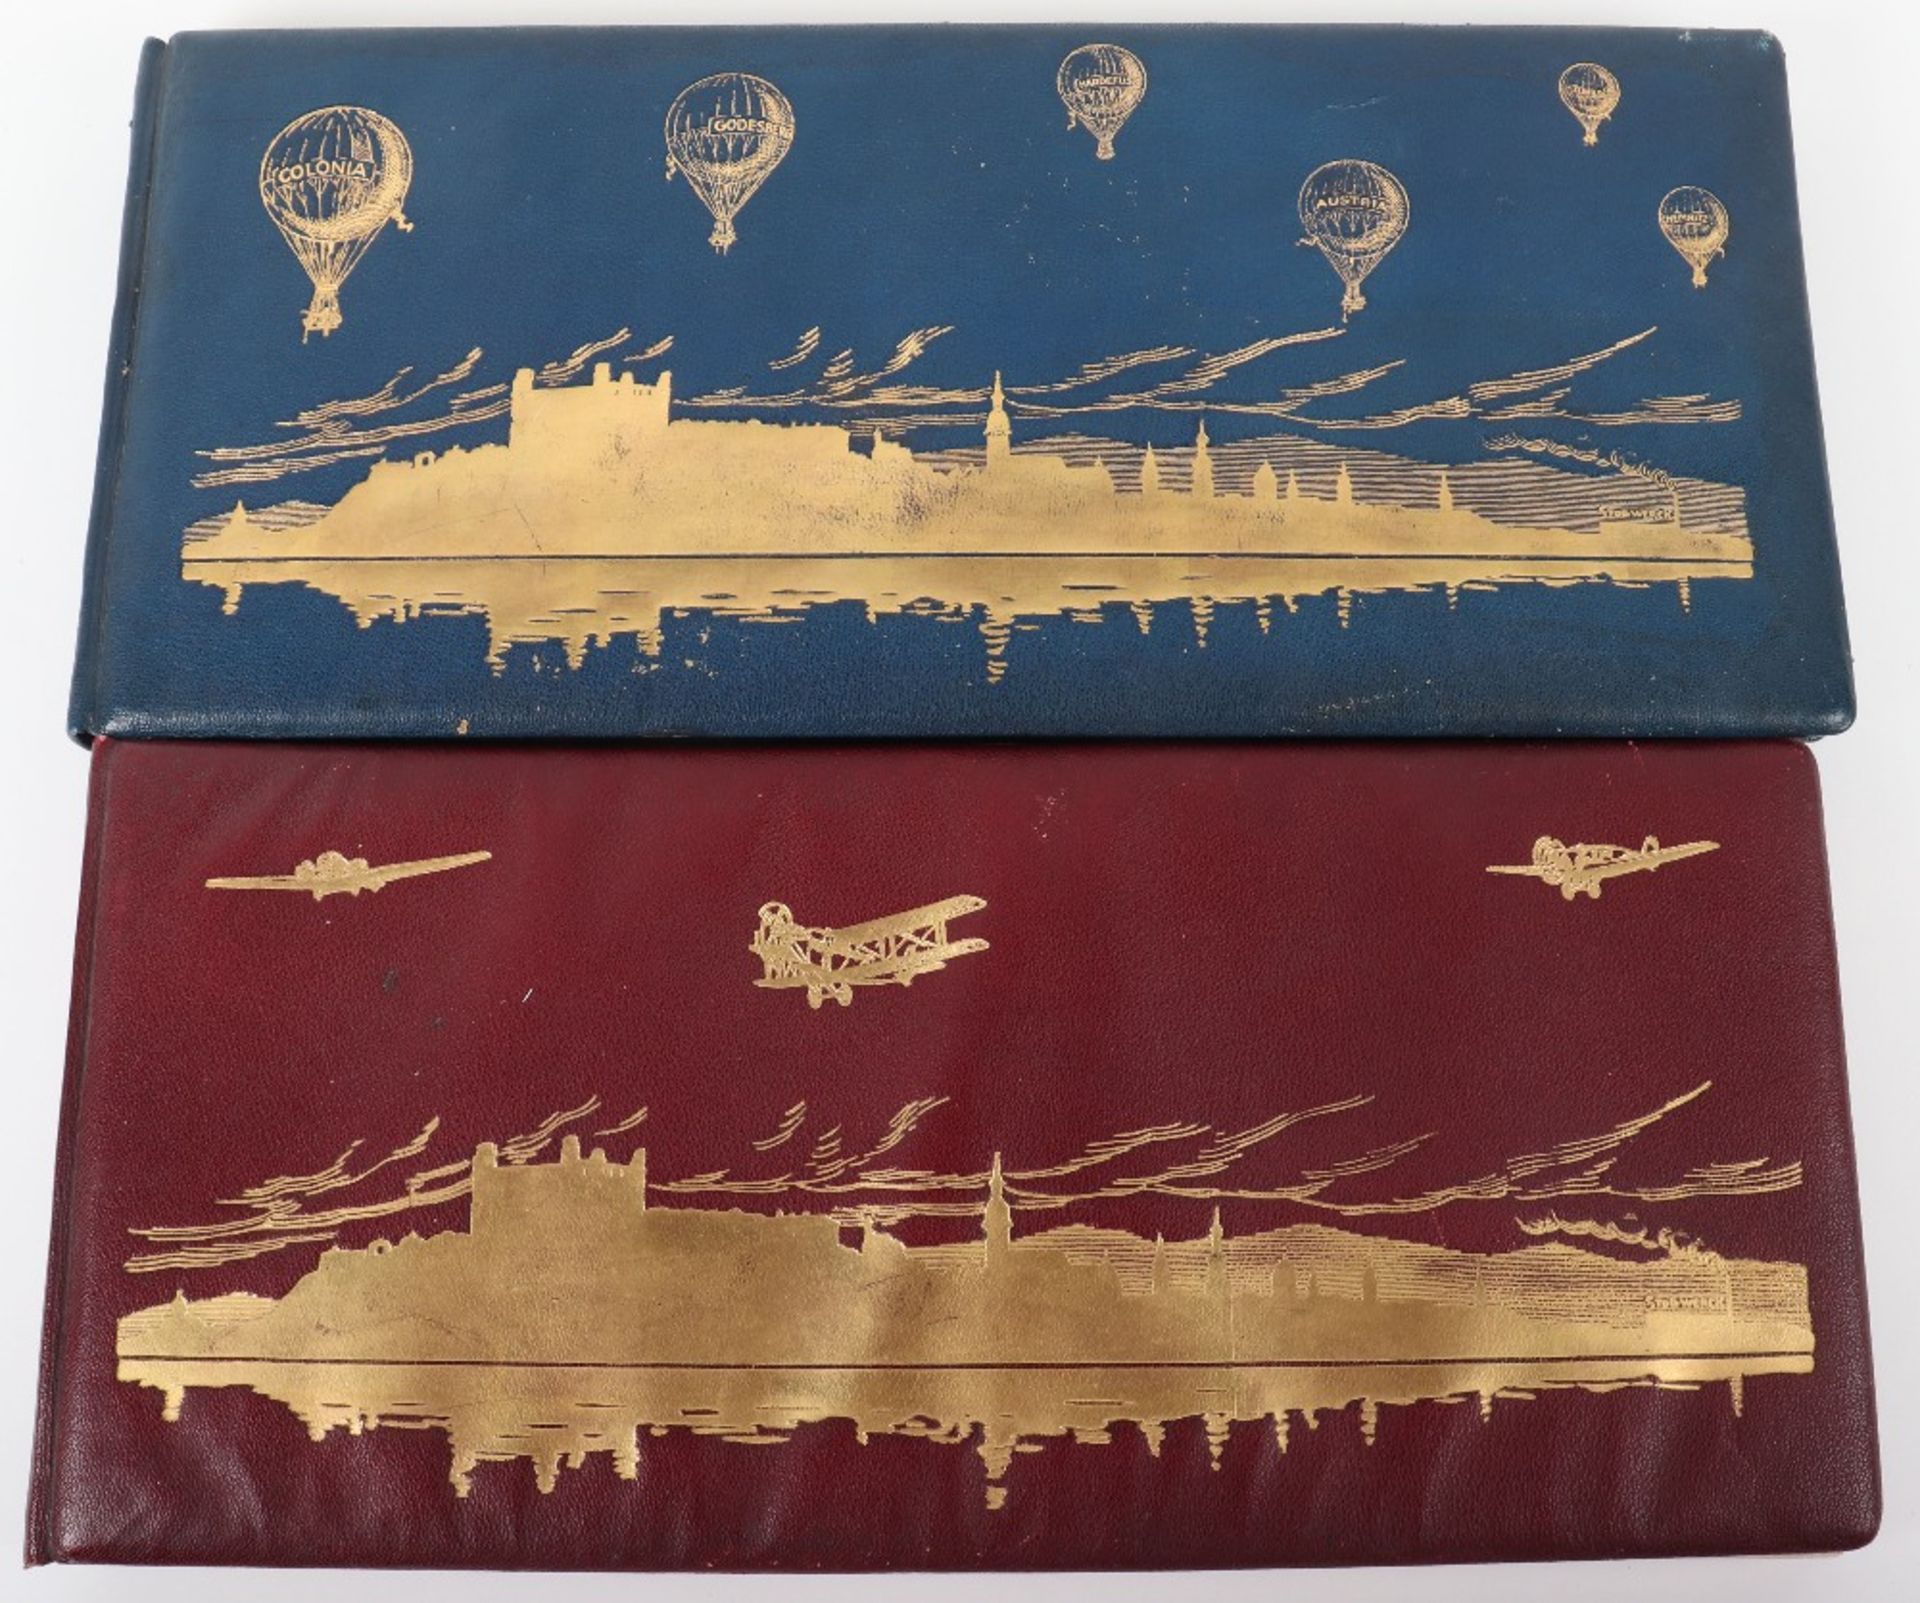 Substantial and Unusual "Log Book" of a Balloon Flight Across Europe in 1928 by Gustav P. Stollwerc